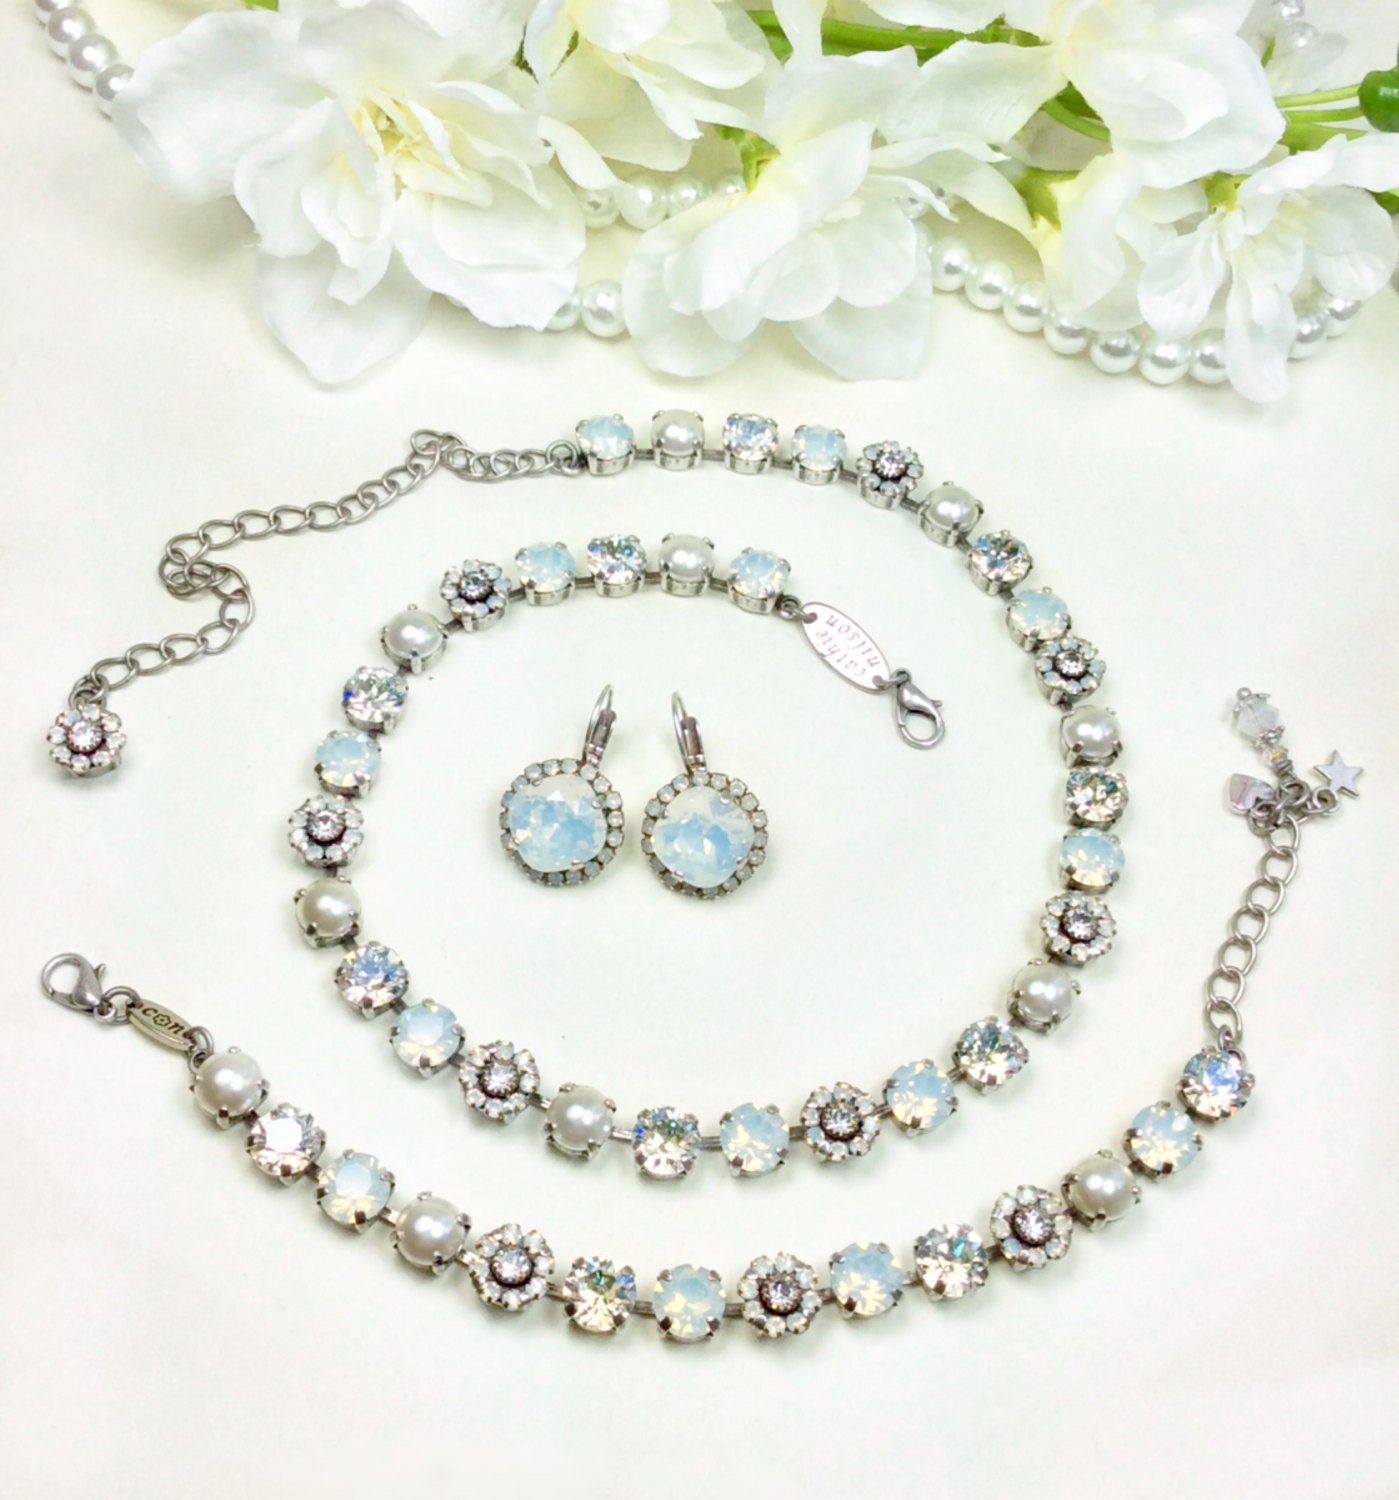 Swarovski Crystal 8.5mm Necklace -  One Of A Kind  " Bridal Bouquet " - Feminine Flowers - FREE SHIPPING